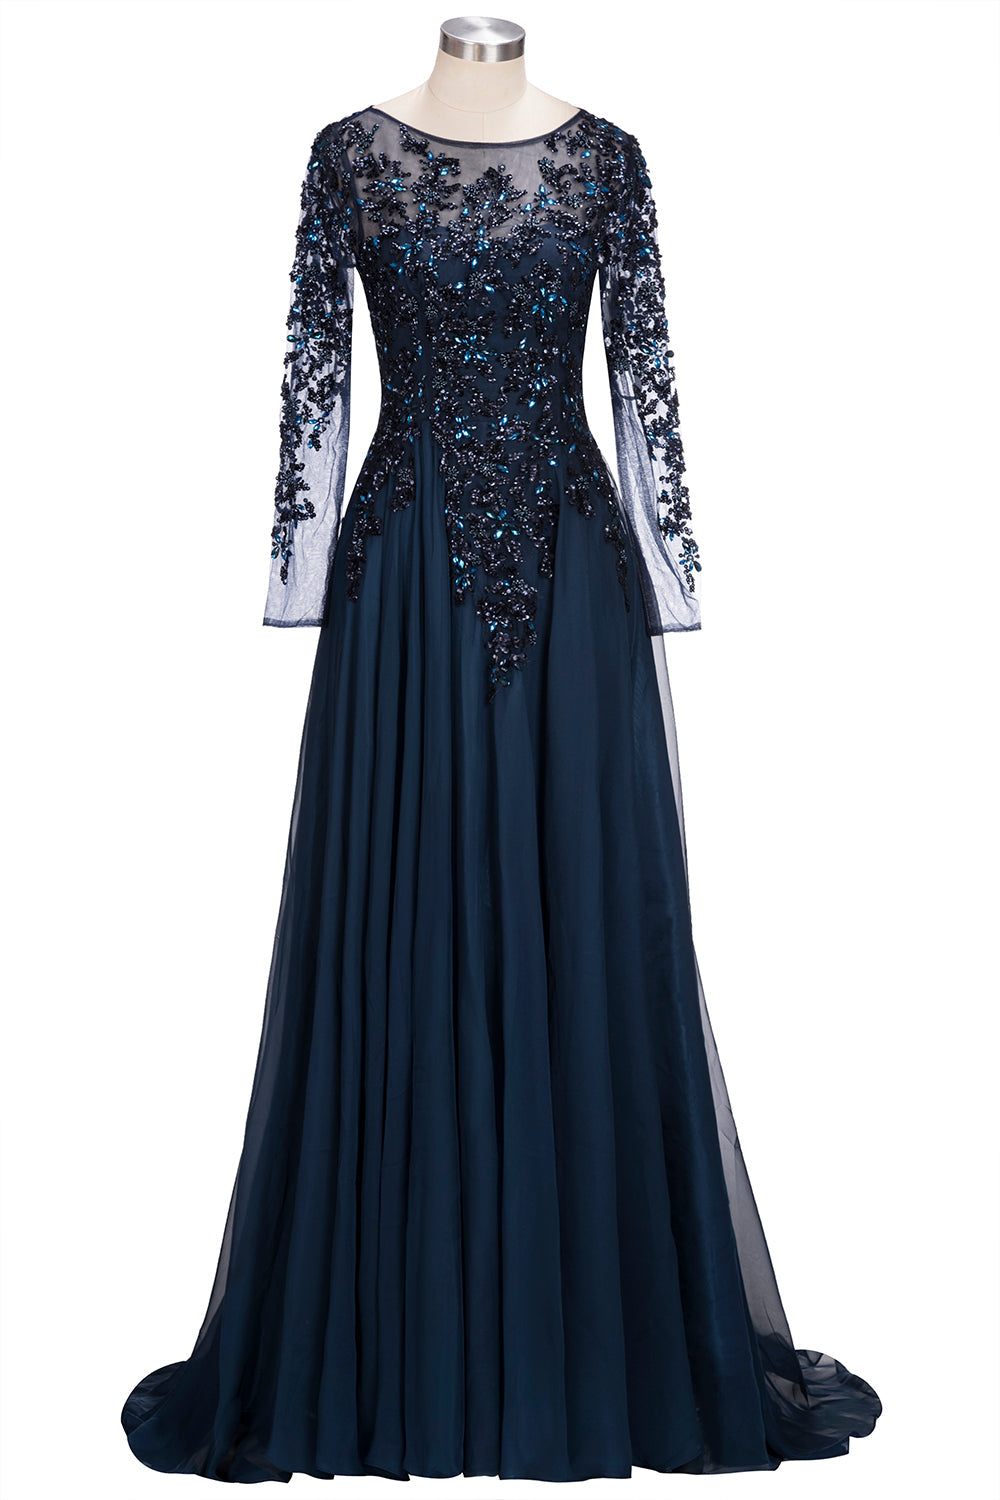 Dark Navy Long A-line Jewel Tulle Formal Evening Dresses with Sleeves-BIZTUNNEL